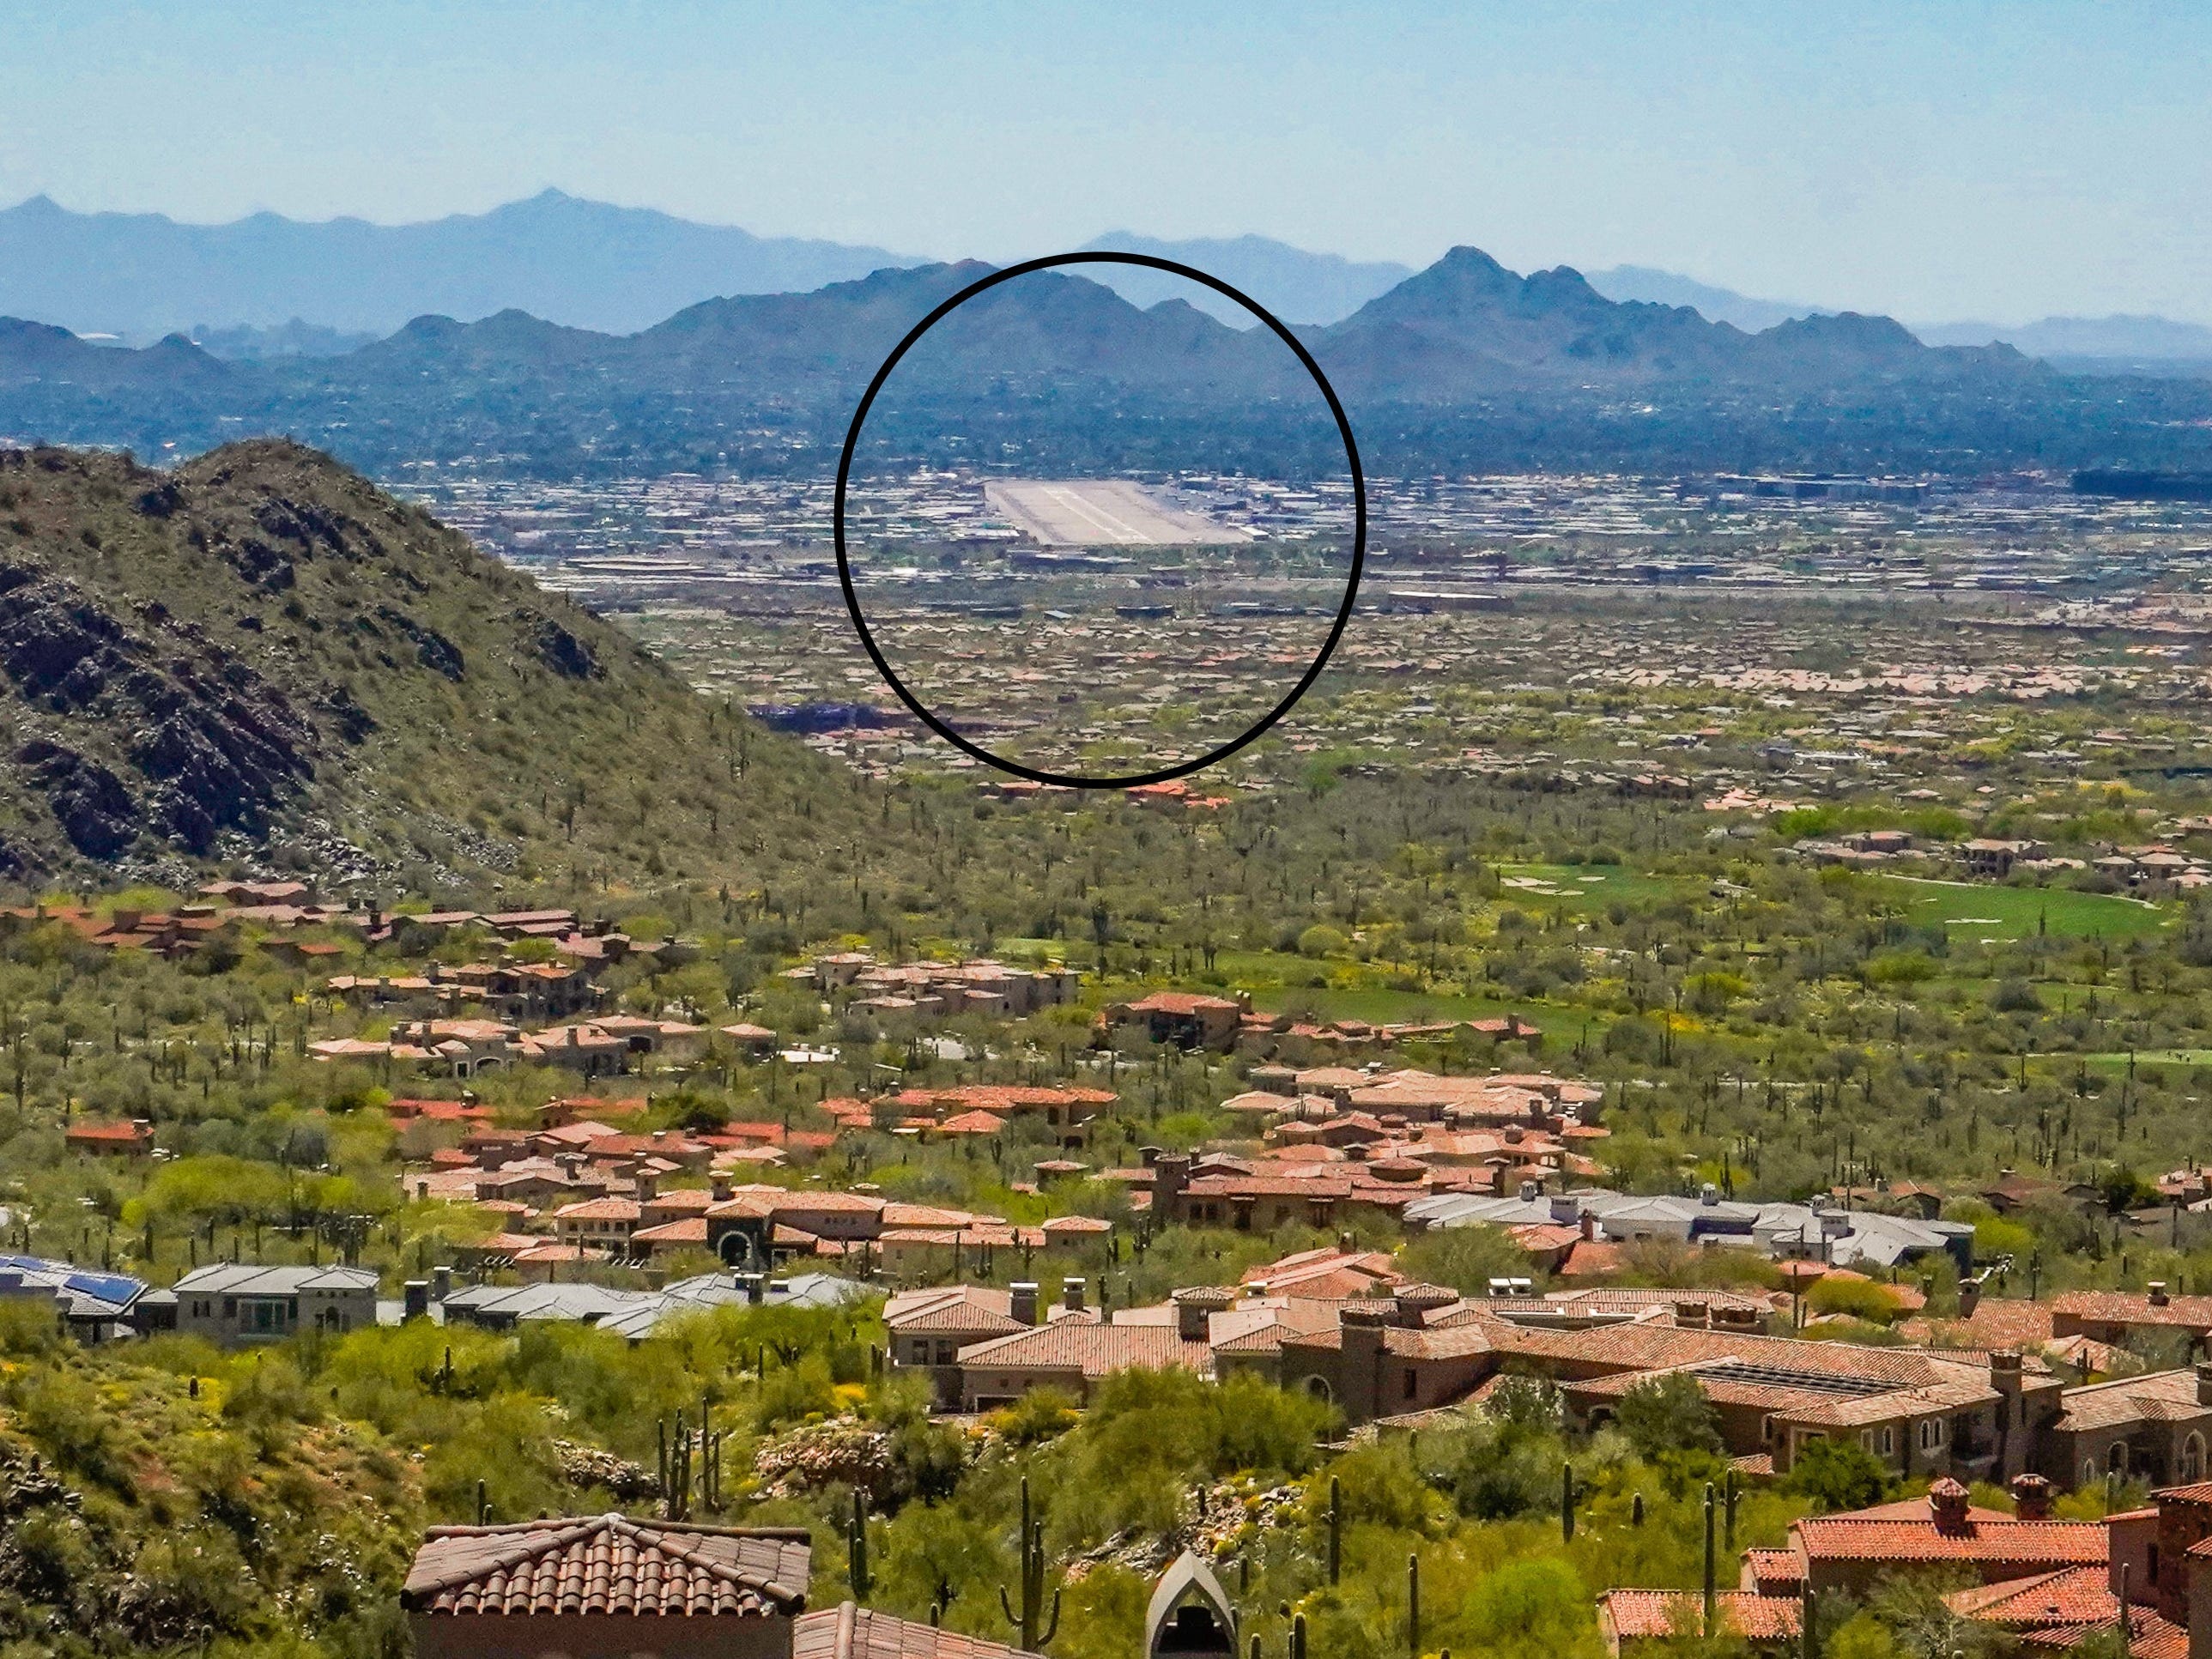 <p>I had a view of the city at the top of DC Ranch in Silverleaf. </p><p>Dankert pointed out that the large tarmac in the distance was Scottsdale Airport, one of the most popular places in the US for the <a href="https://www.businessinsider.com/most-popular-airports-private-jets-pj-jet-tracking-list-2023-12">ultrawealthy to park their private jets</a>.</p><p>Shackelton said many of her clients move to DC Ranch to be close to their personal aircraft, which is only 20 minutes away.</p>